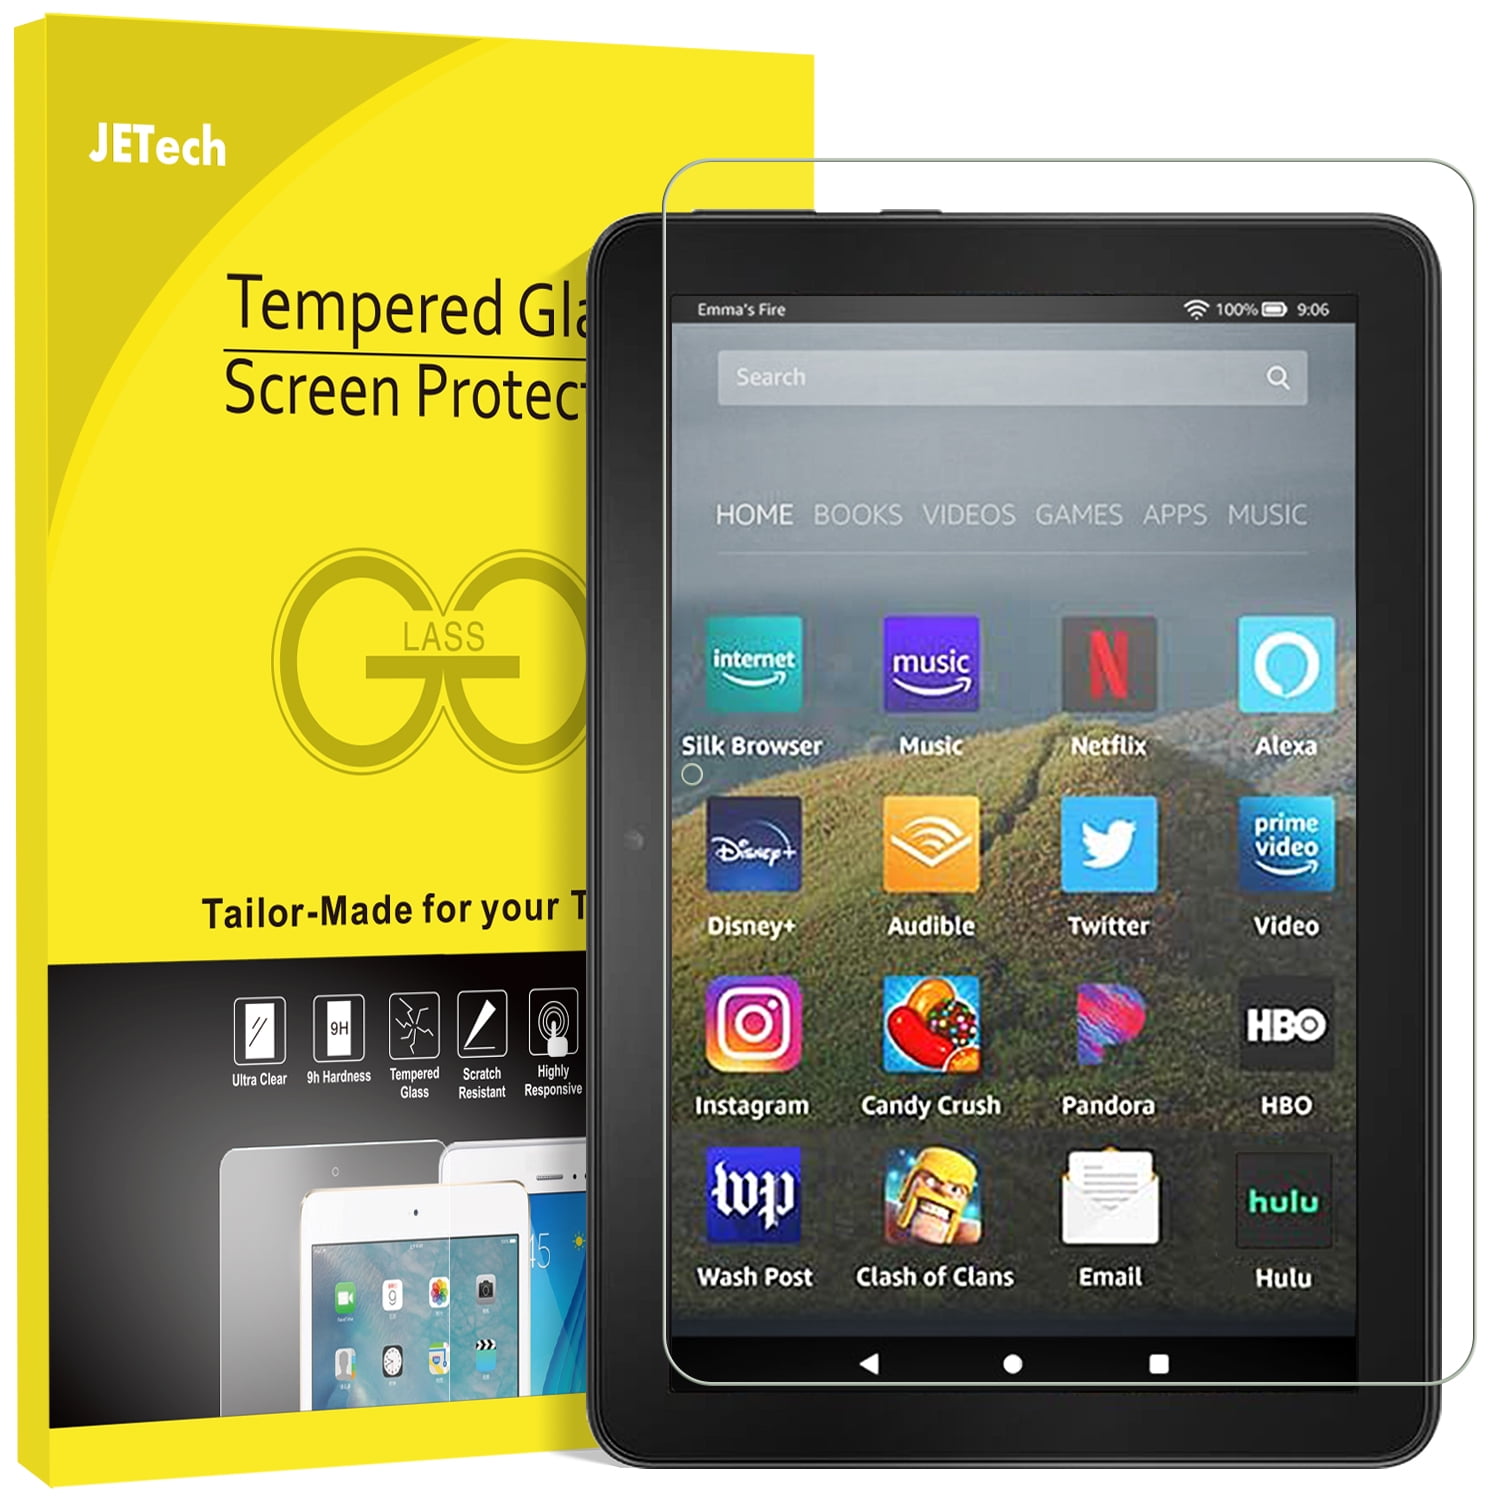 2X Tempered Glass 9H Screen Protector Film For Amazon Kindle fire 7 HD 8 10 2017 